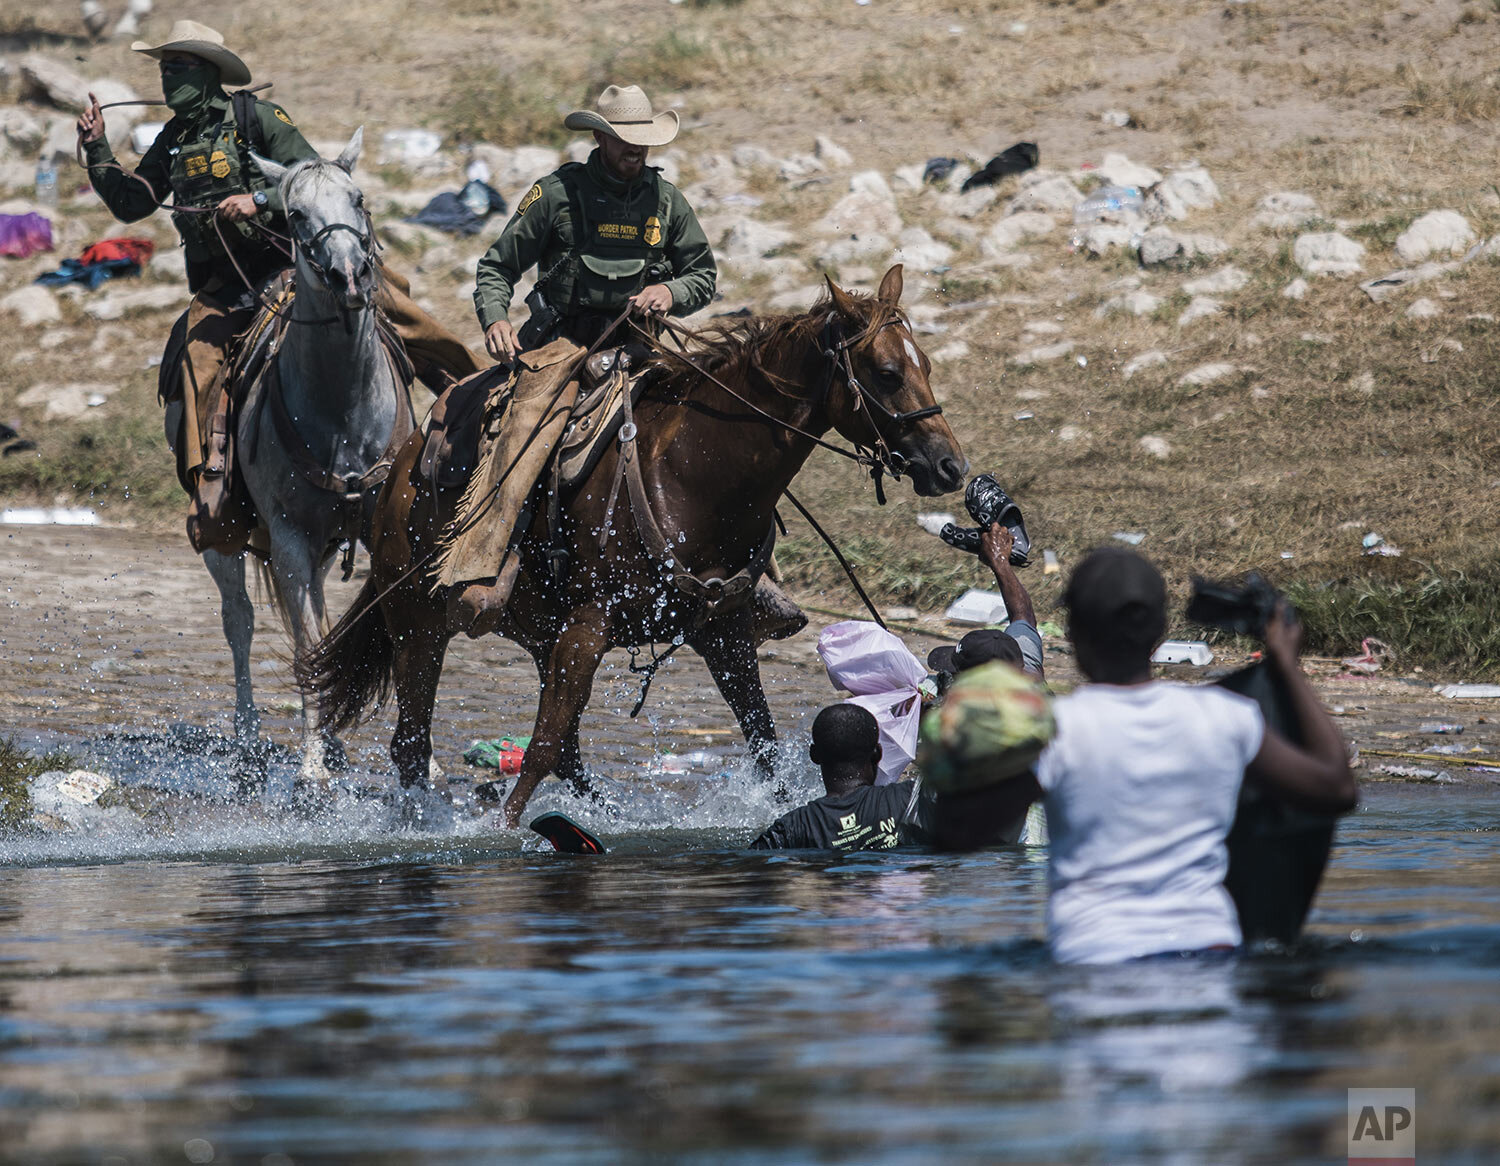  U.S. Customs and Border Protection mounted officers attempt to contain migrants as they cross the Rio Grande from Ciudad Acuña, Mexico, into Del Rio, Texas, Sept. 19, 2021. (AP Photo/Felix Marquez) 